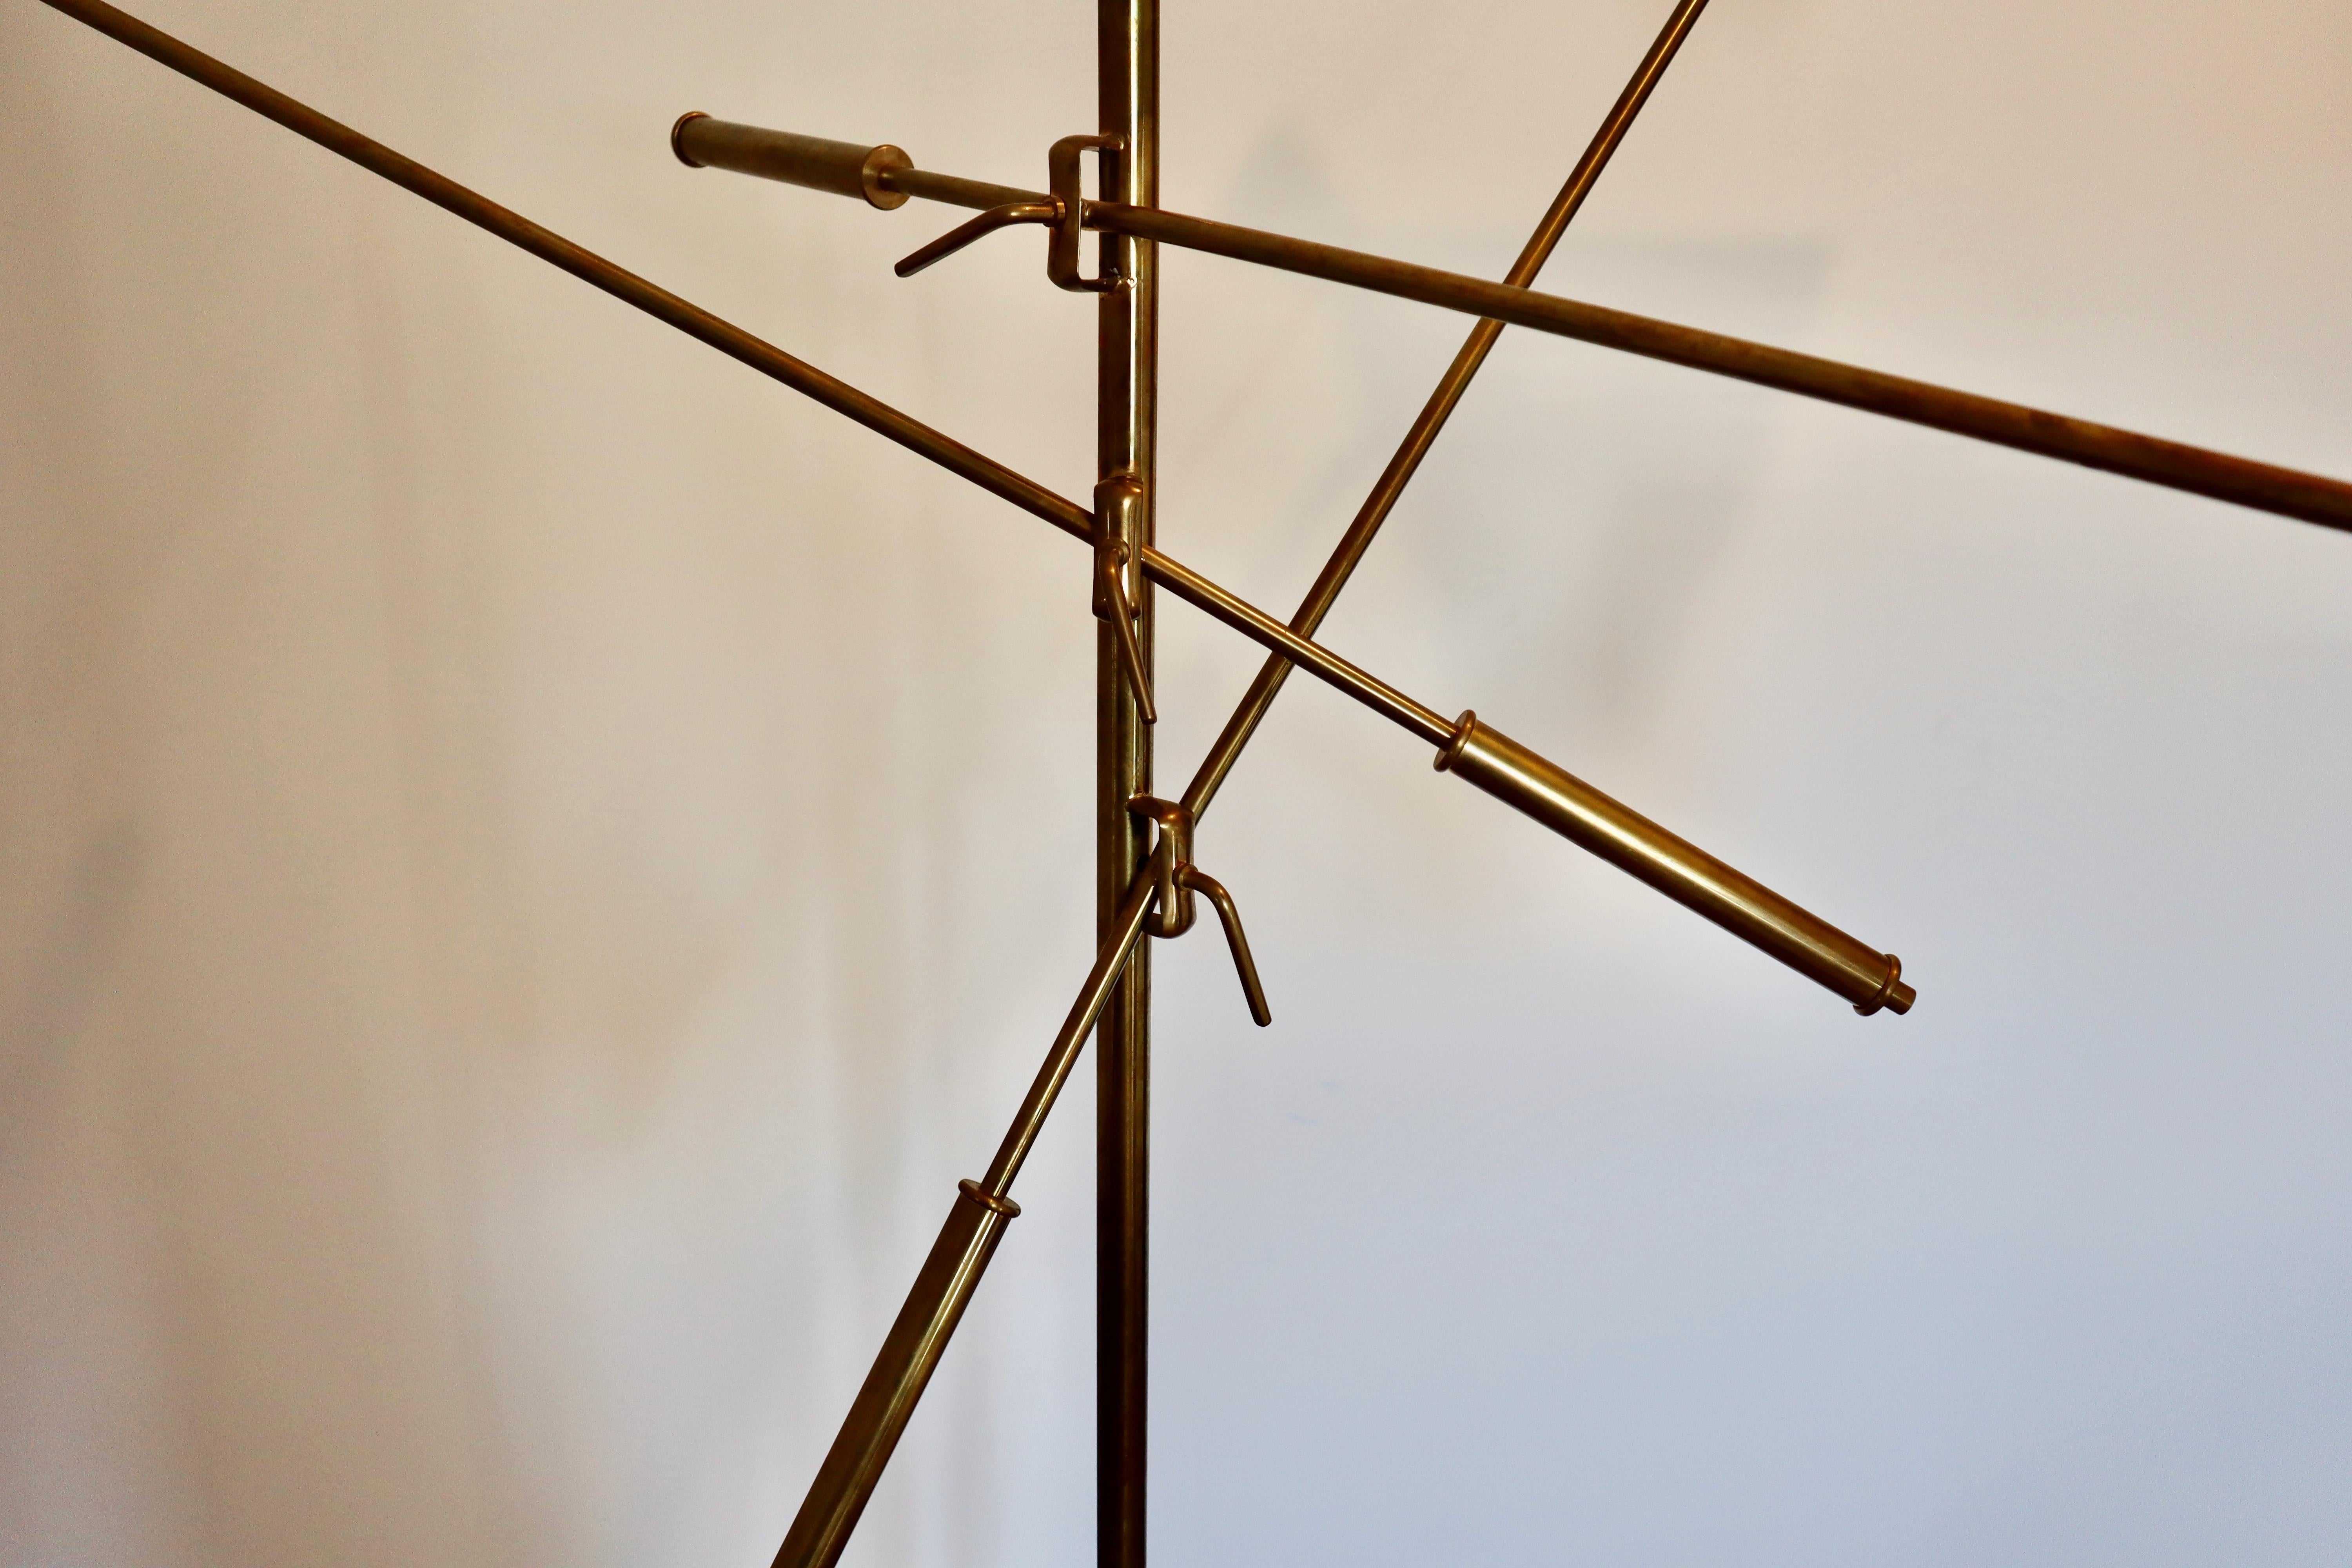 Monumental Mid Century Modern Brass Floor Lamp, Lelli, Ponti, Royère style In Good Condition For Sale In Grand Cayman, KY